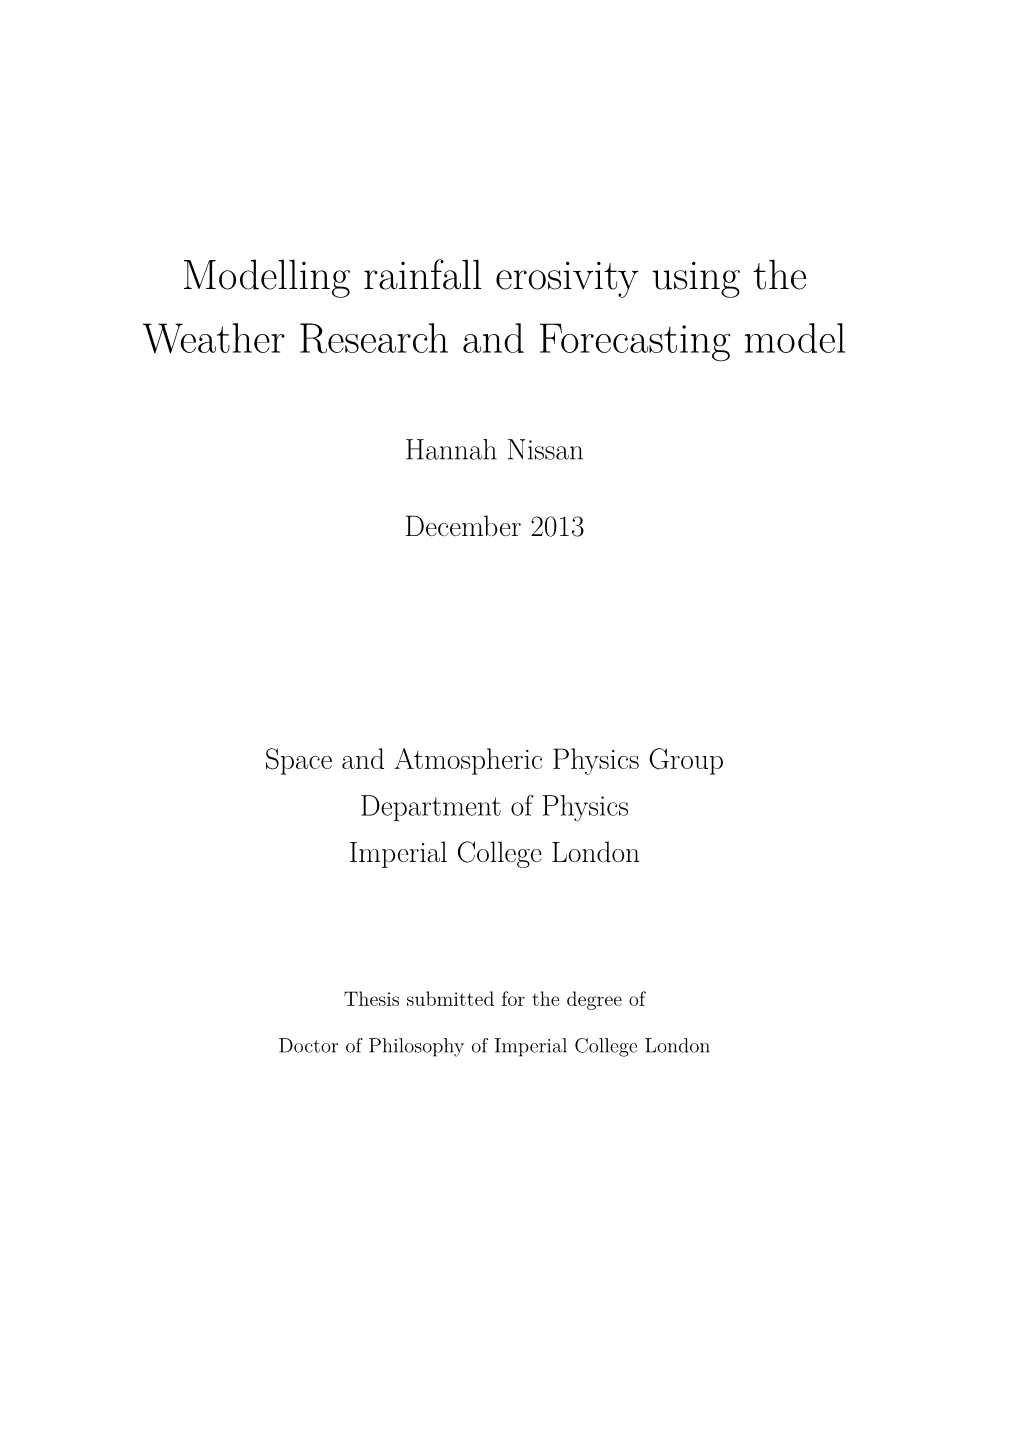 Modelling Rainfall Erosivity Using the Weather Research and Forecasting Model